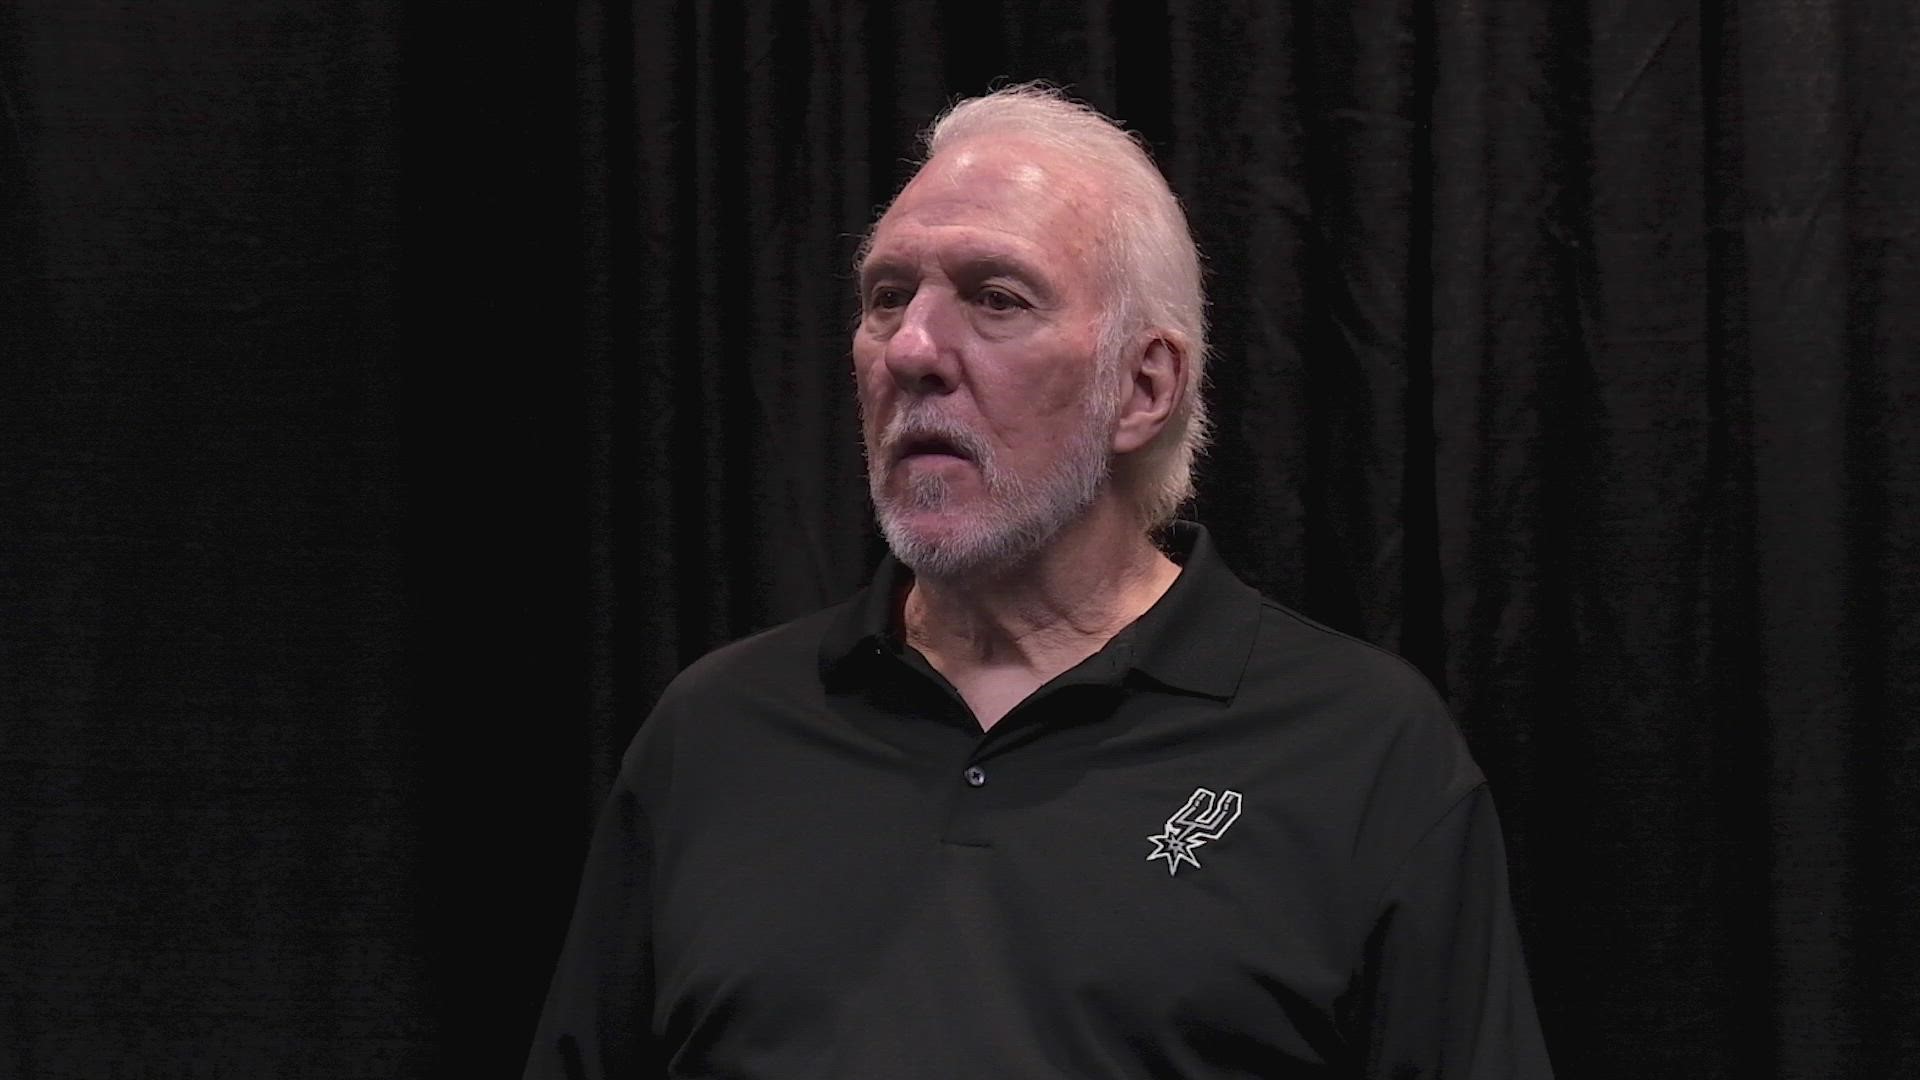 Pop said that he was happy with his team's effort, but that Anthony Davis led his team to victory.